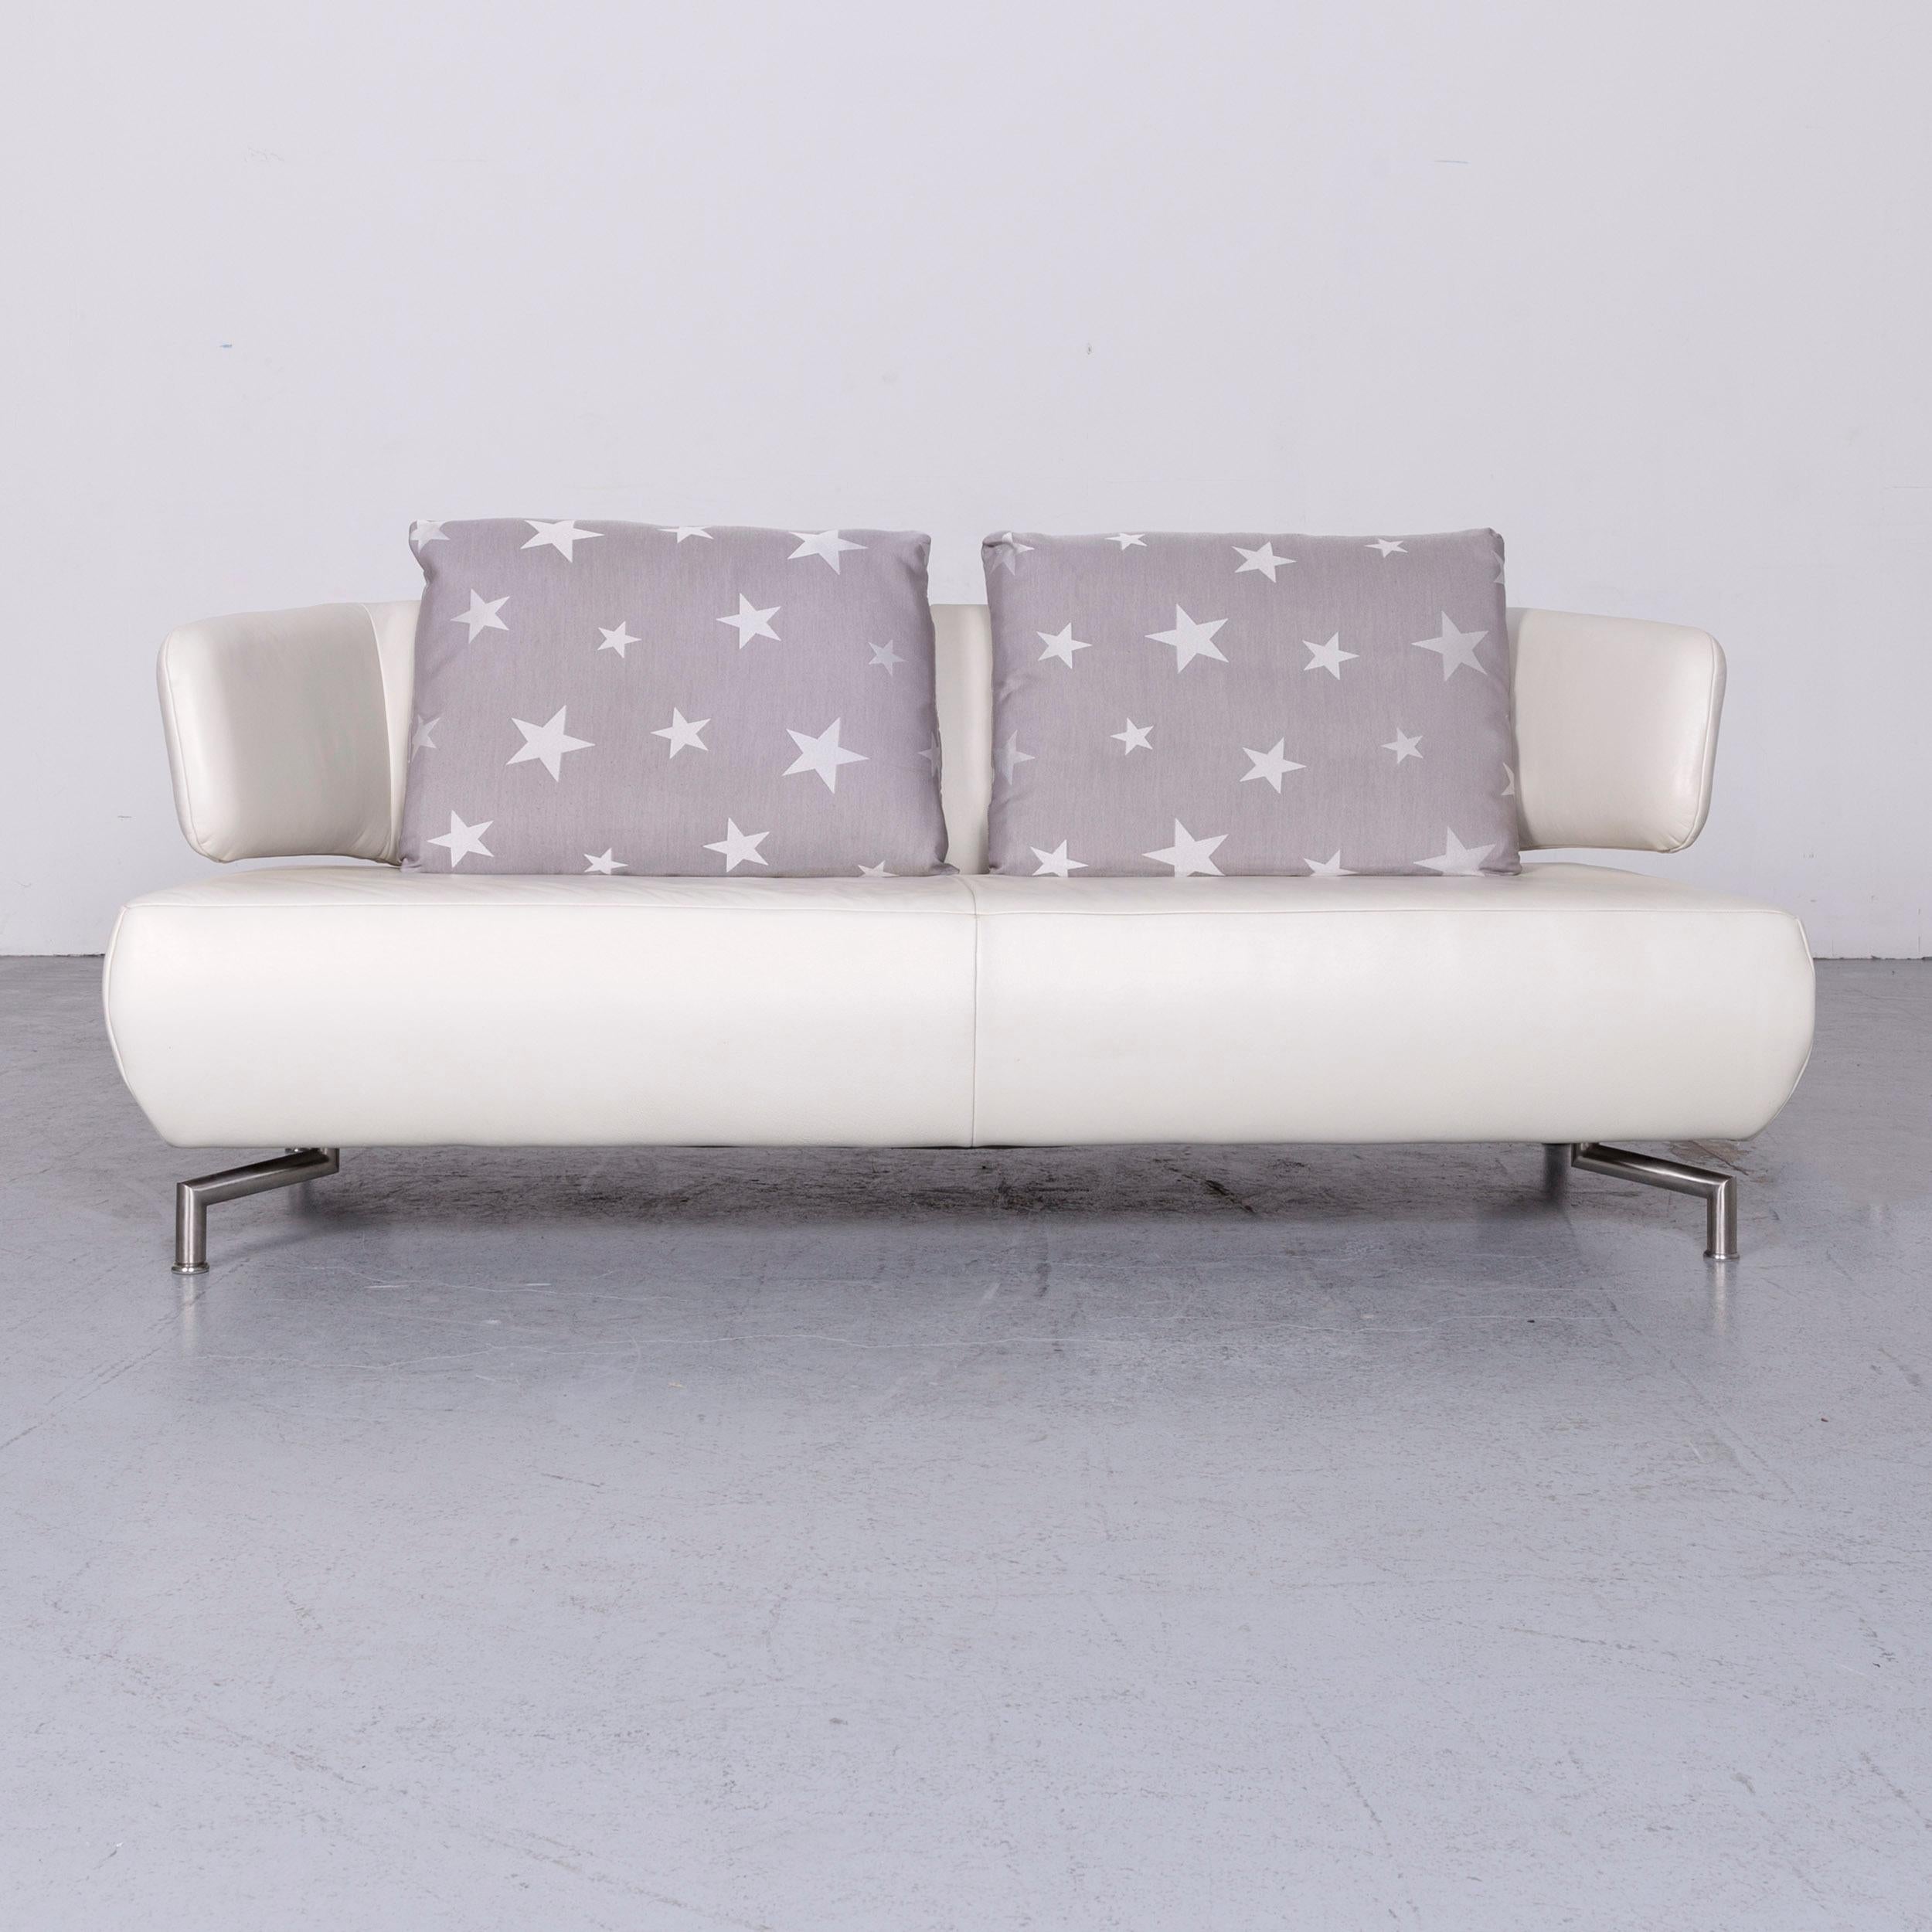 We bring to you a Koinor designer two-seat sofa white leather couch with pillow.